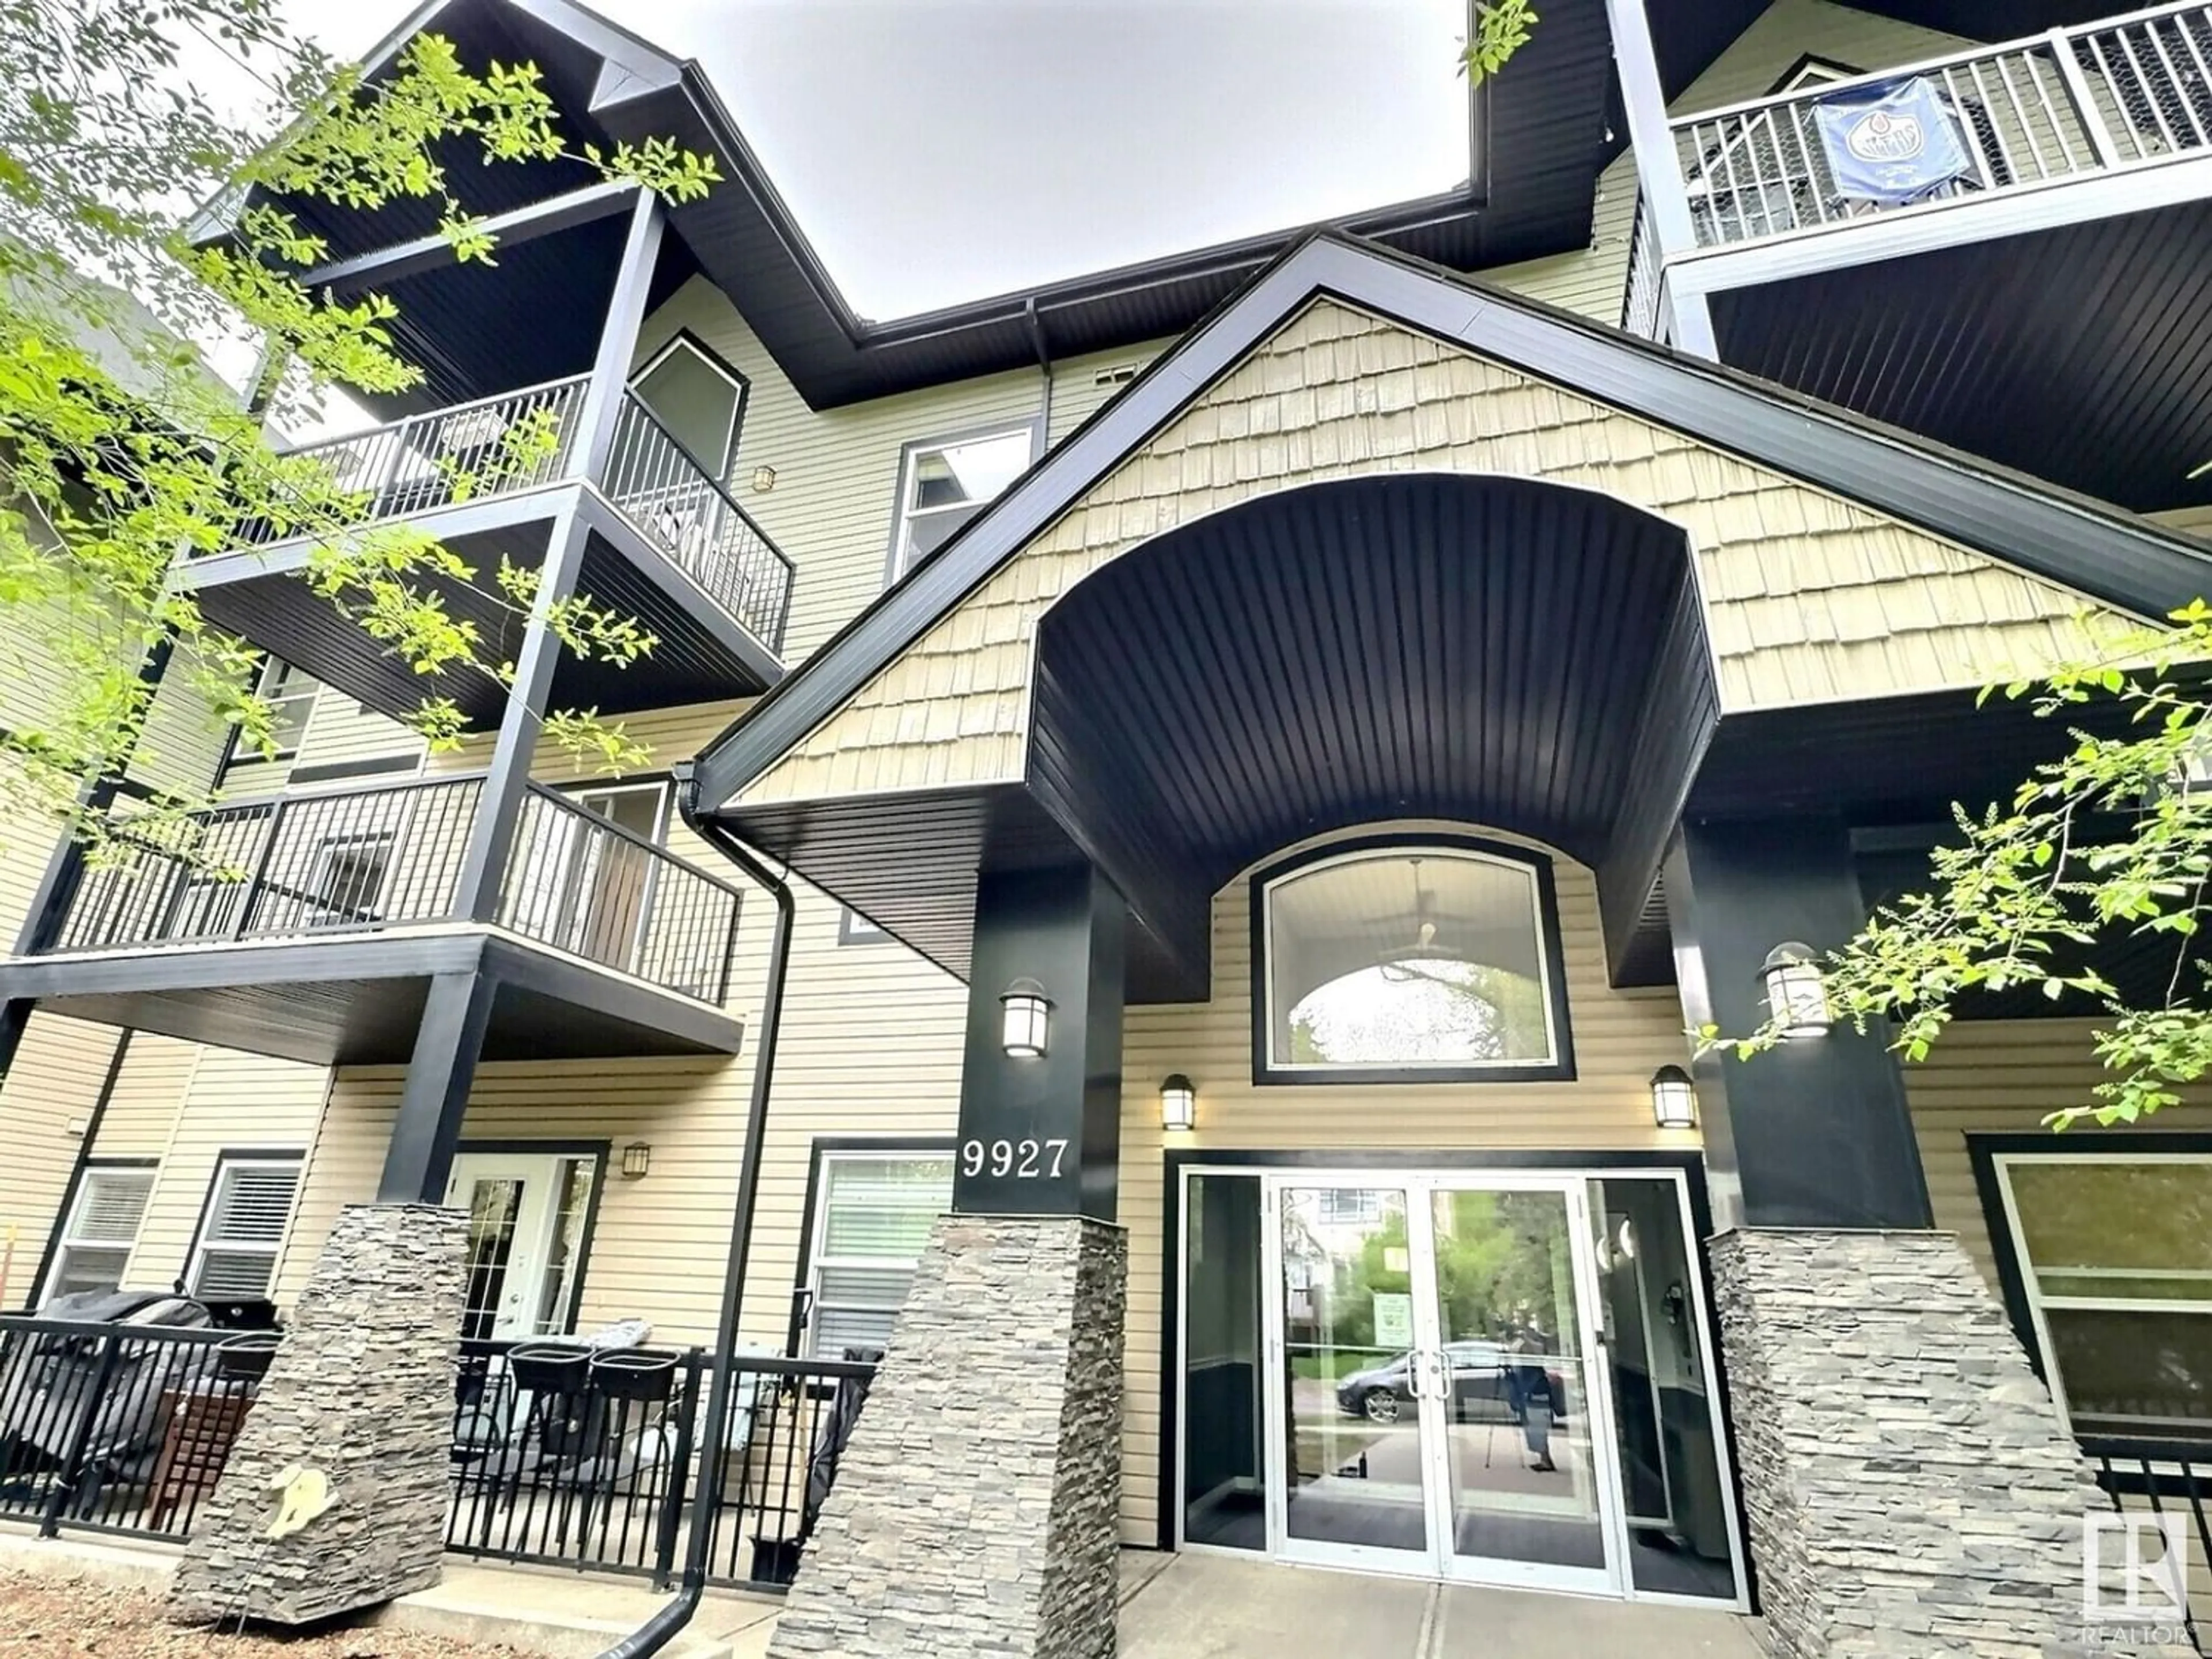 A pic from exterior of the house or condo for #201 9927 79 AV NW, Edmonton Alberta T6E1R3